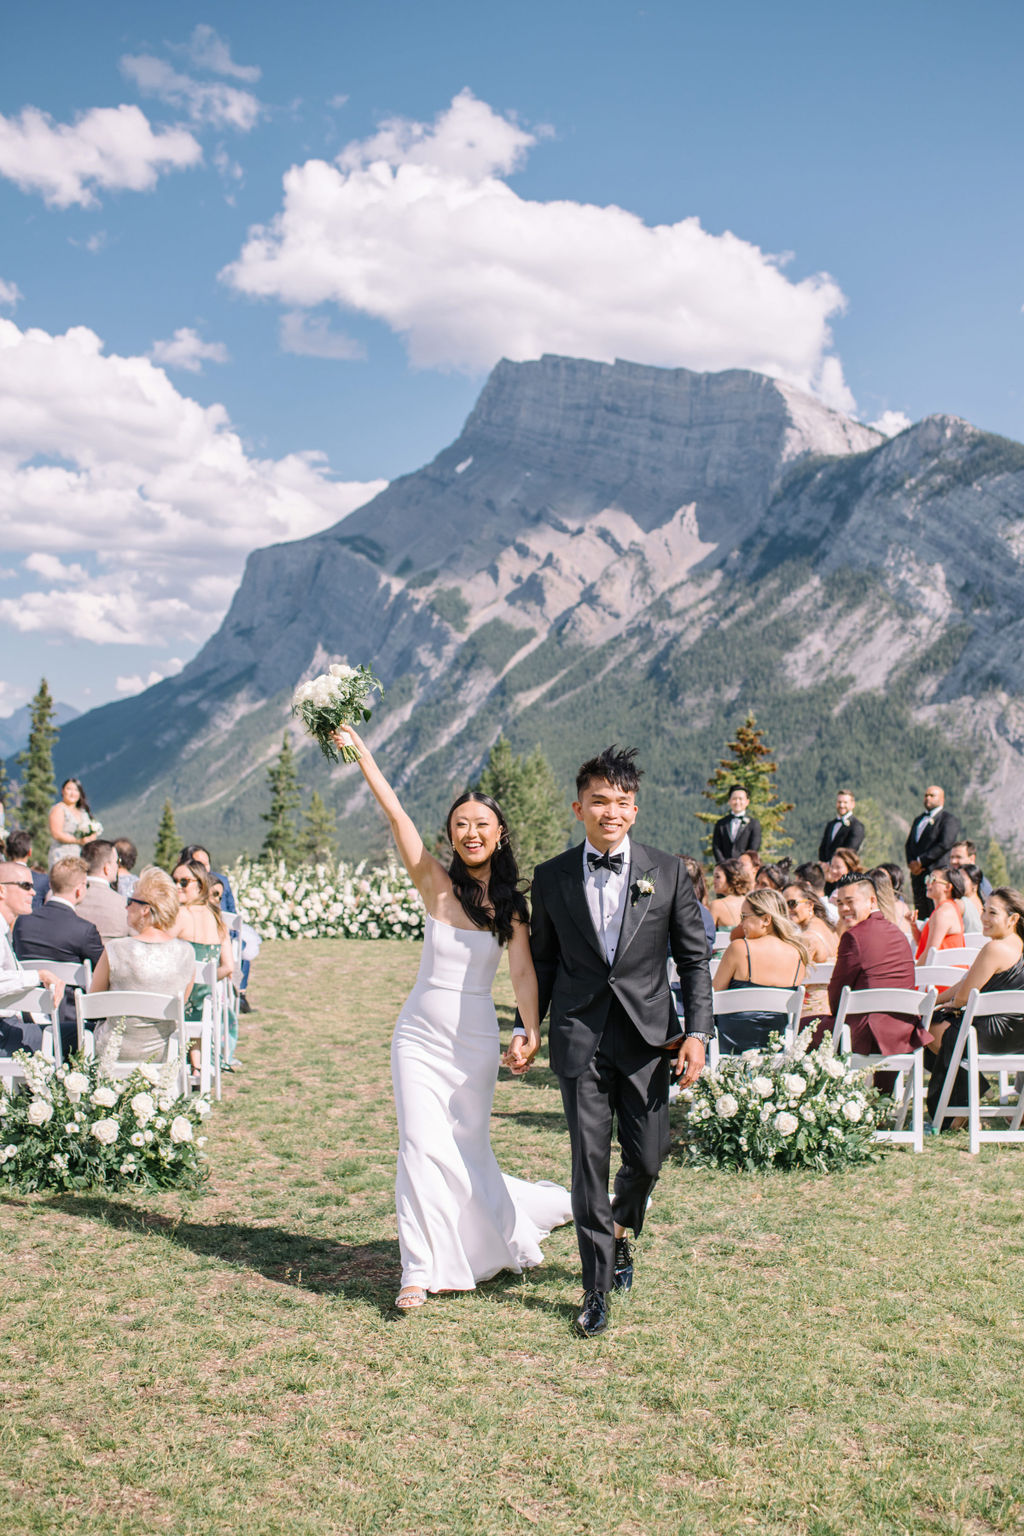 Bride and groom exit sophisticated mountain wedding ceremony in Banff, Alberta, Canada. Summer mountain wedding inspiration. 